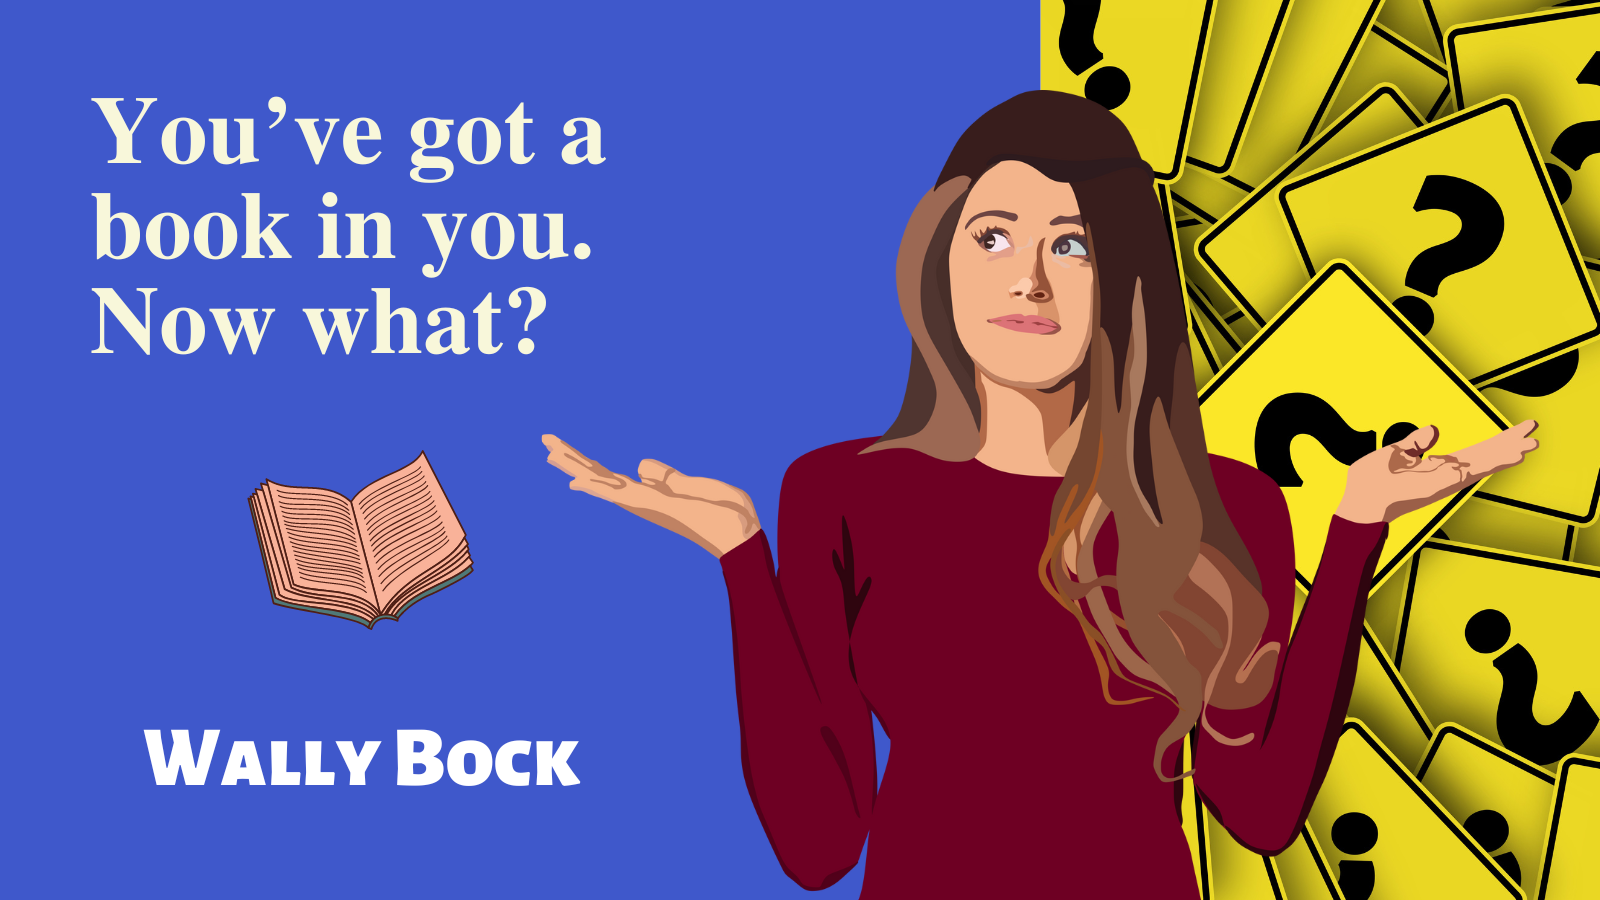 You’ve got a book in you. Now what?